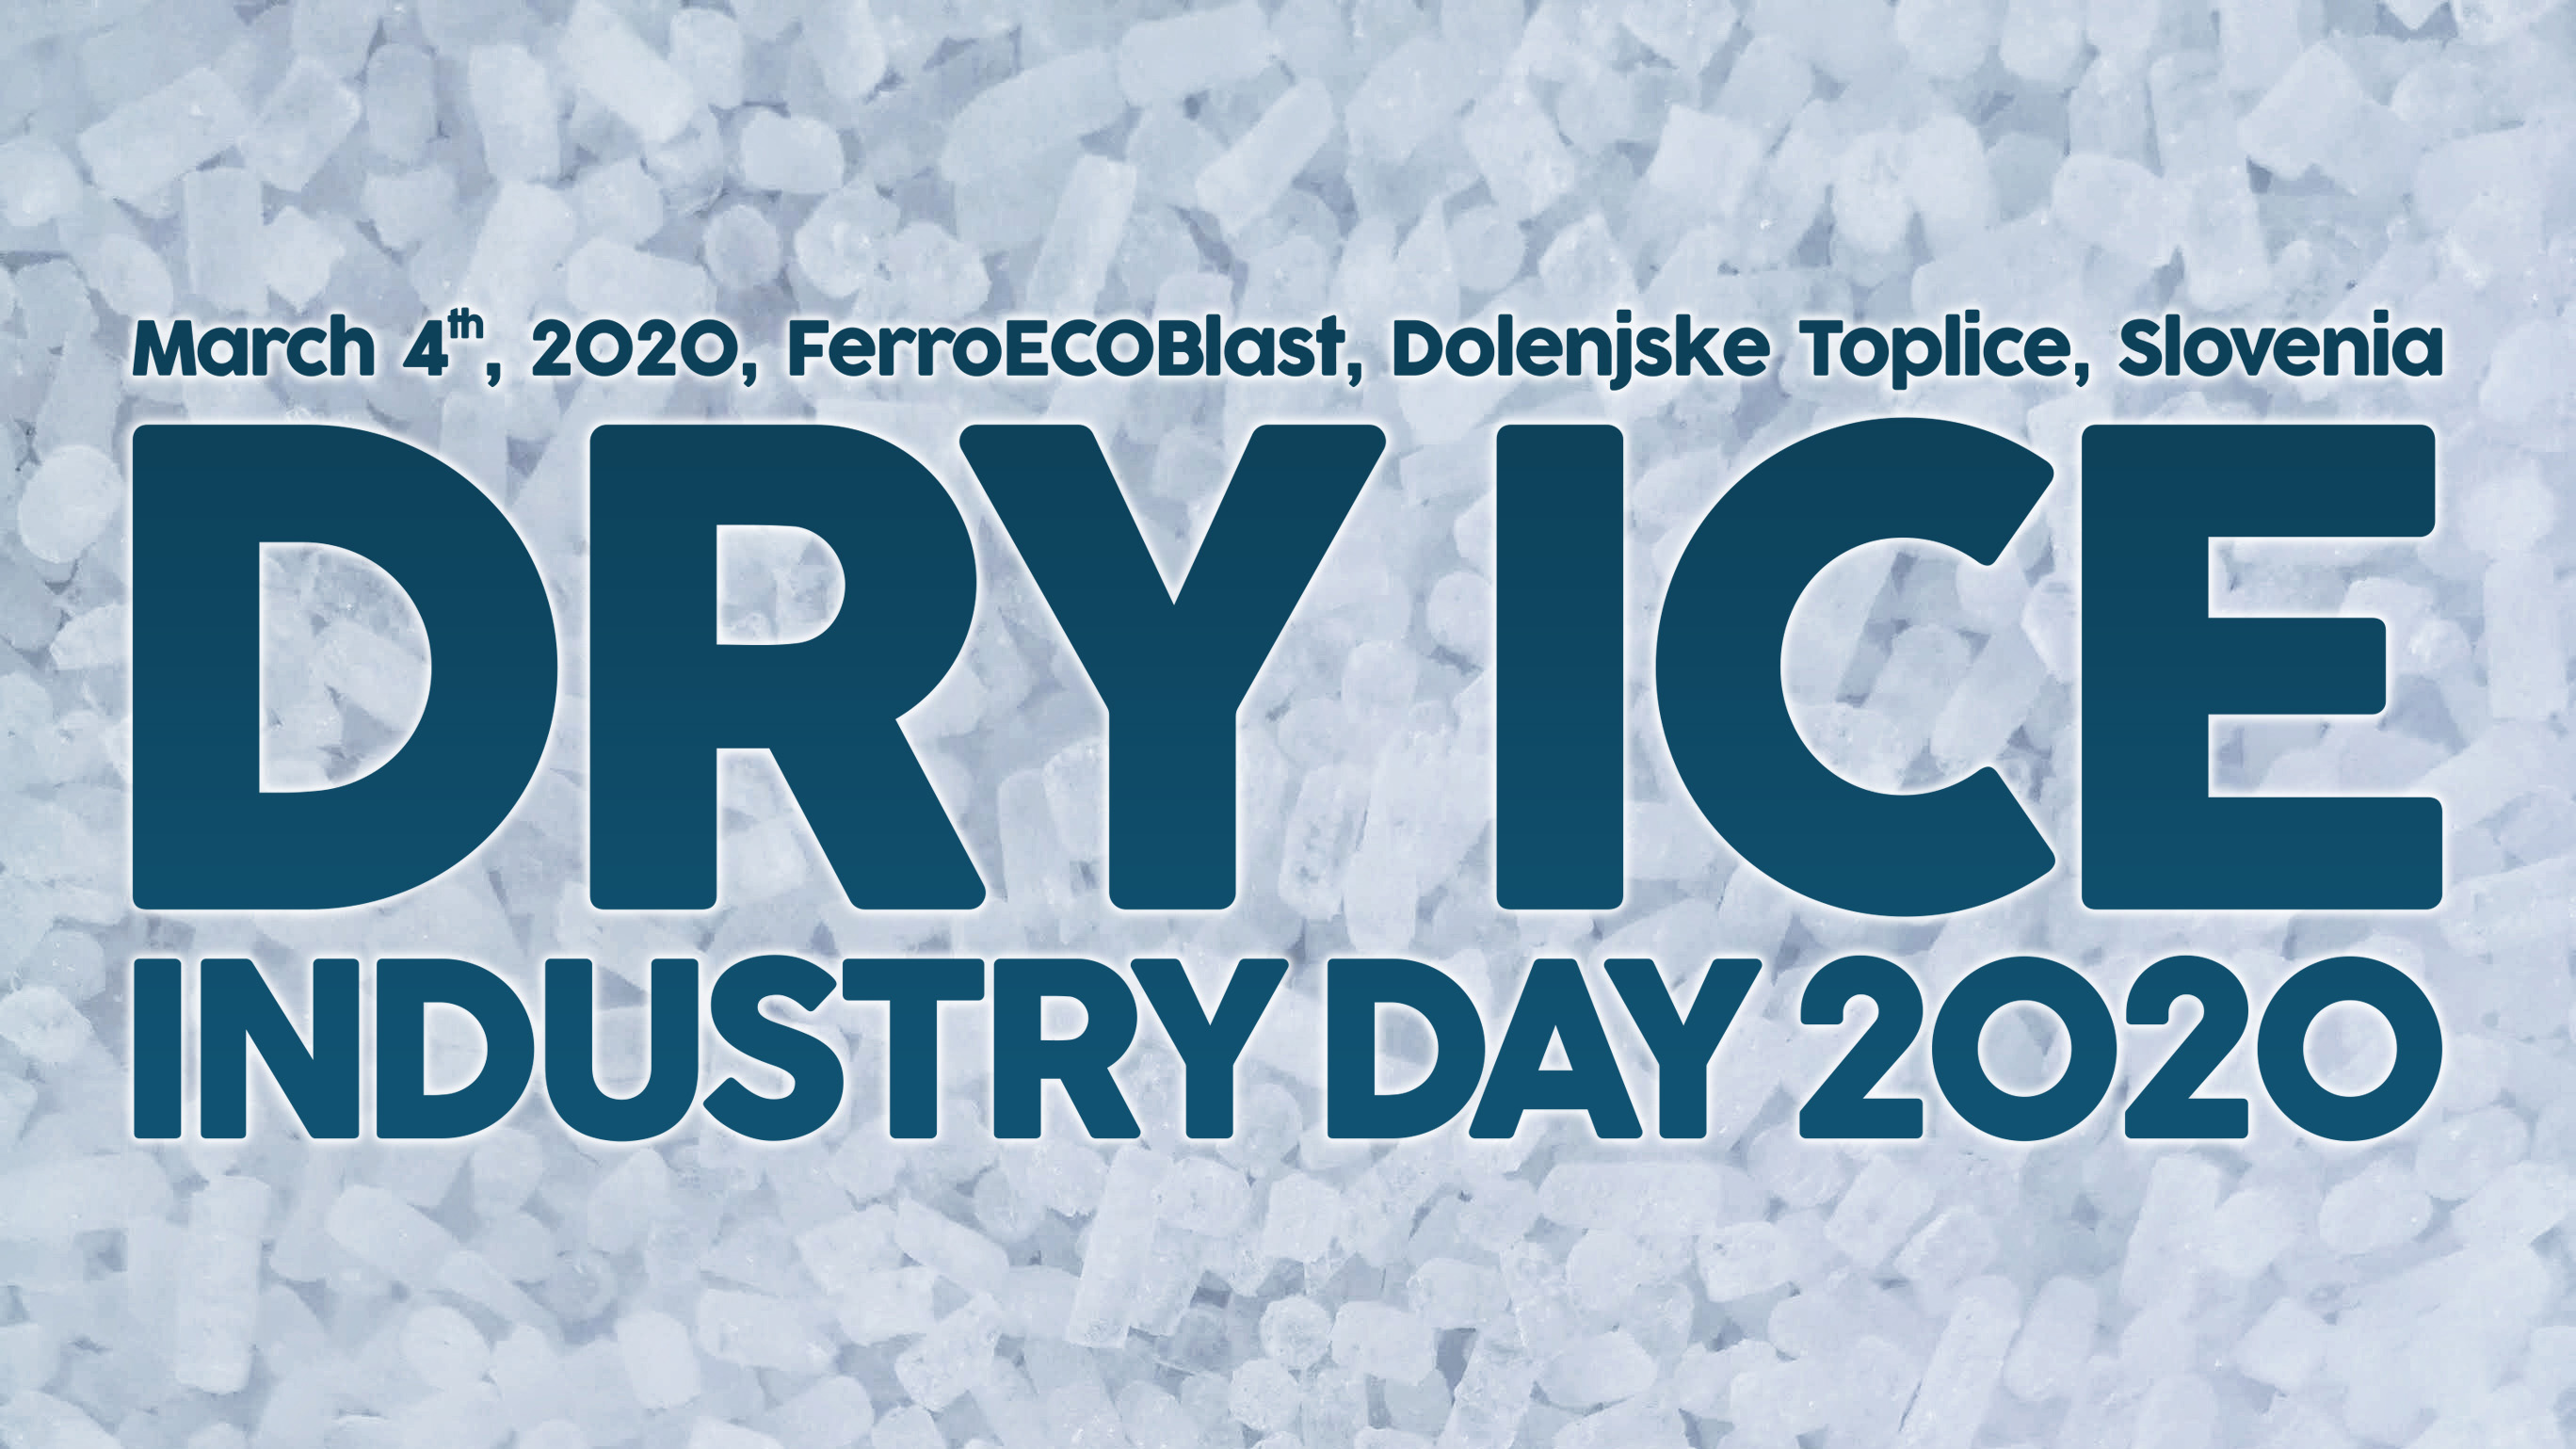 <h2>Join us at <span style="color: rgb(196, 22, 28);"><strong>Dry Ice Industry Day 2020!</strong></span></h2>